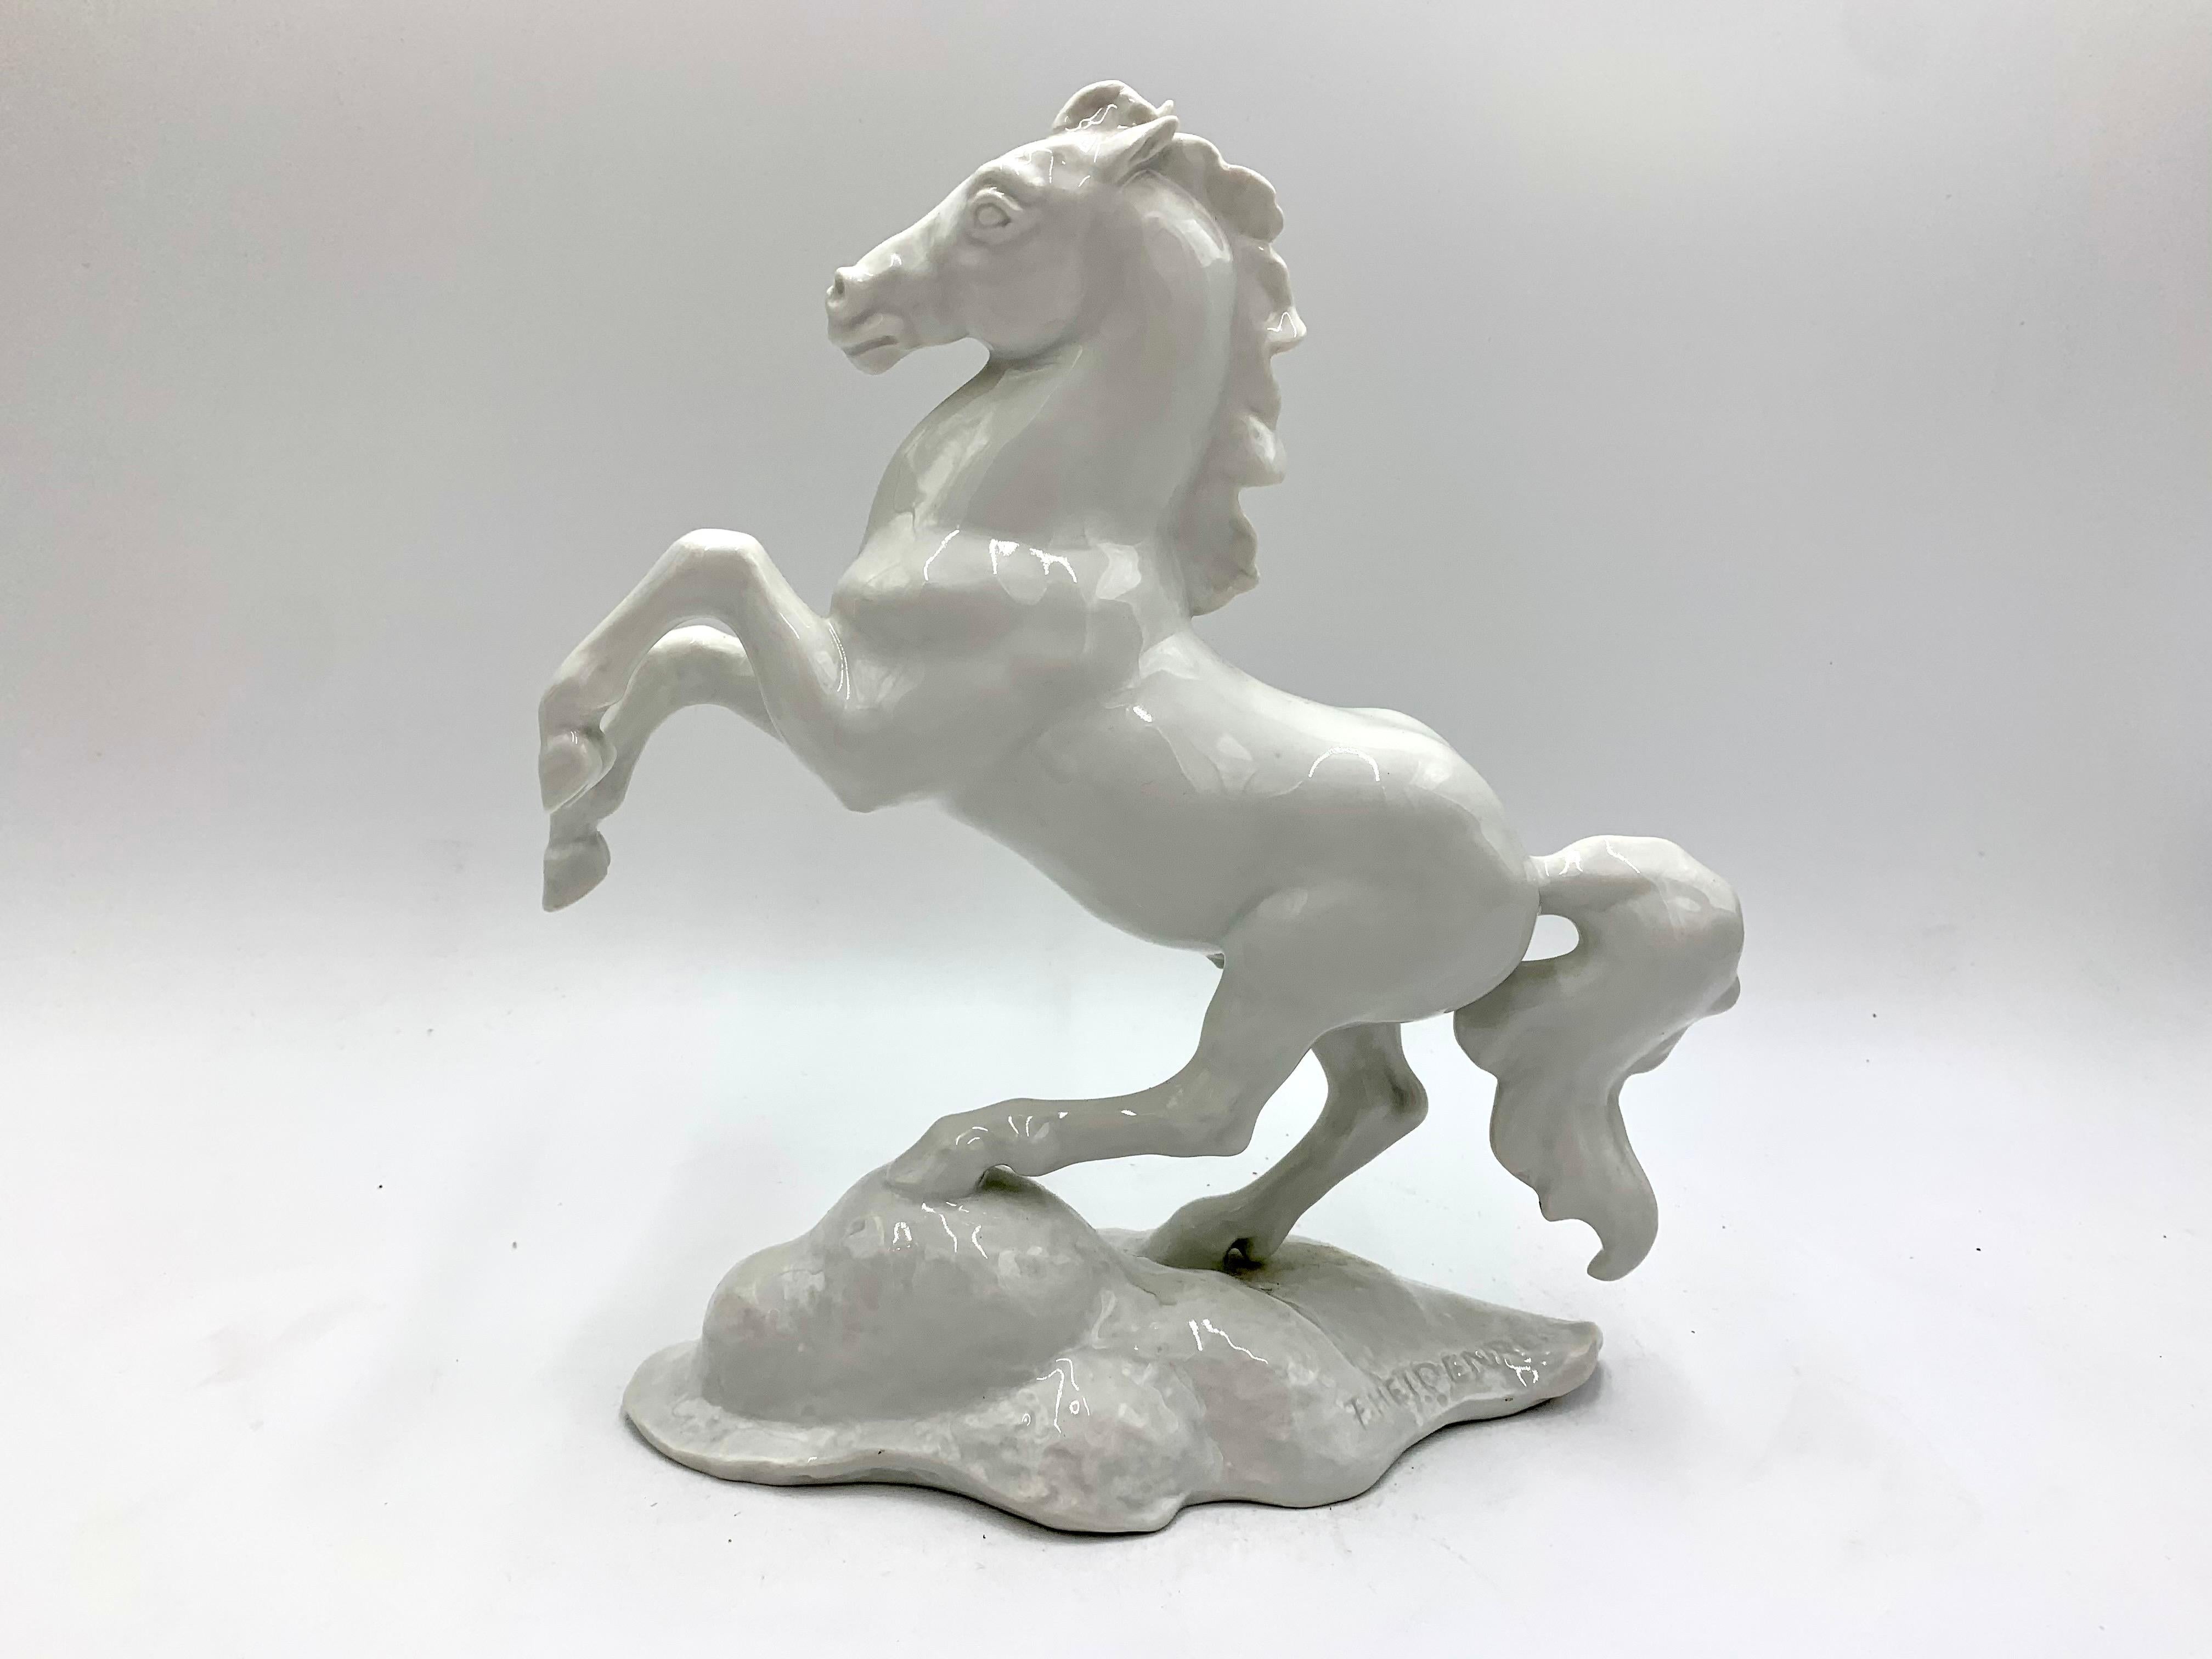 A large porcelain figurine of a horse.
White glazed porcelain.
Design by F. Heidenreich for Rosenthal. The year 1944.
Without damages.
Measures: height 27.5 cm / width 28 cm / depth 9 cm.